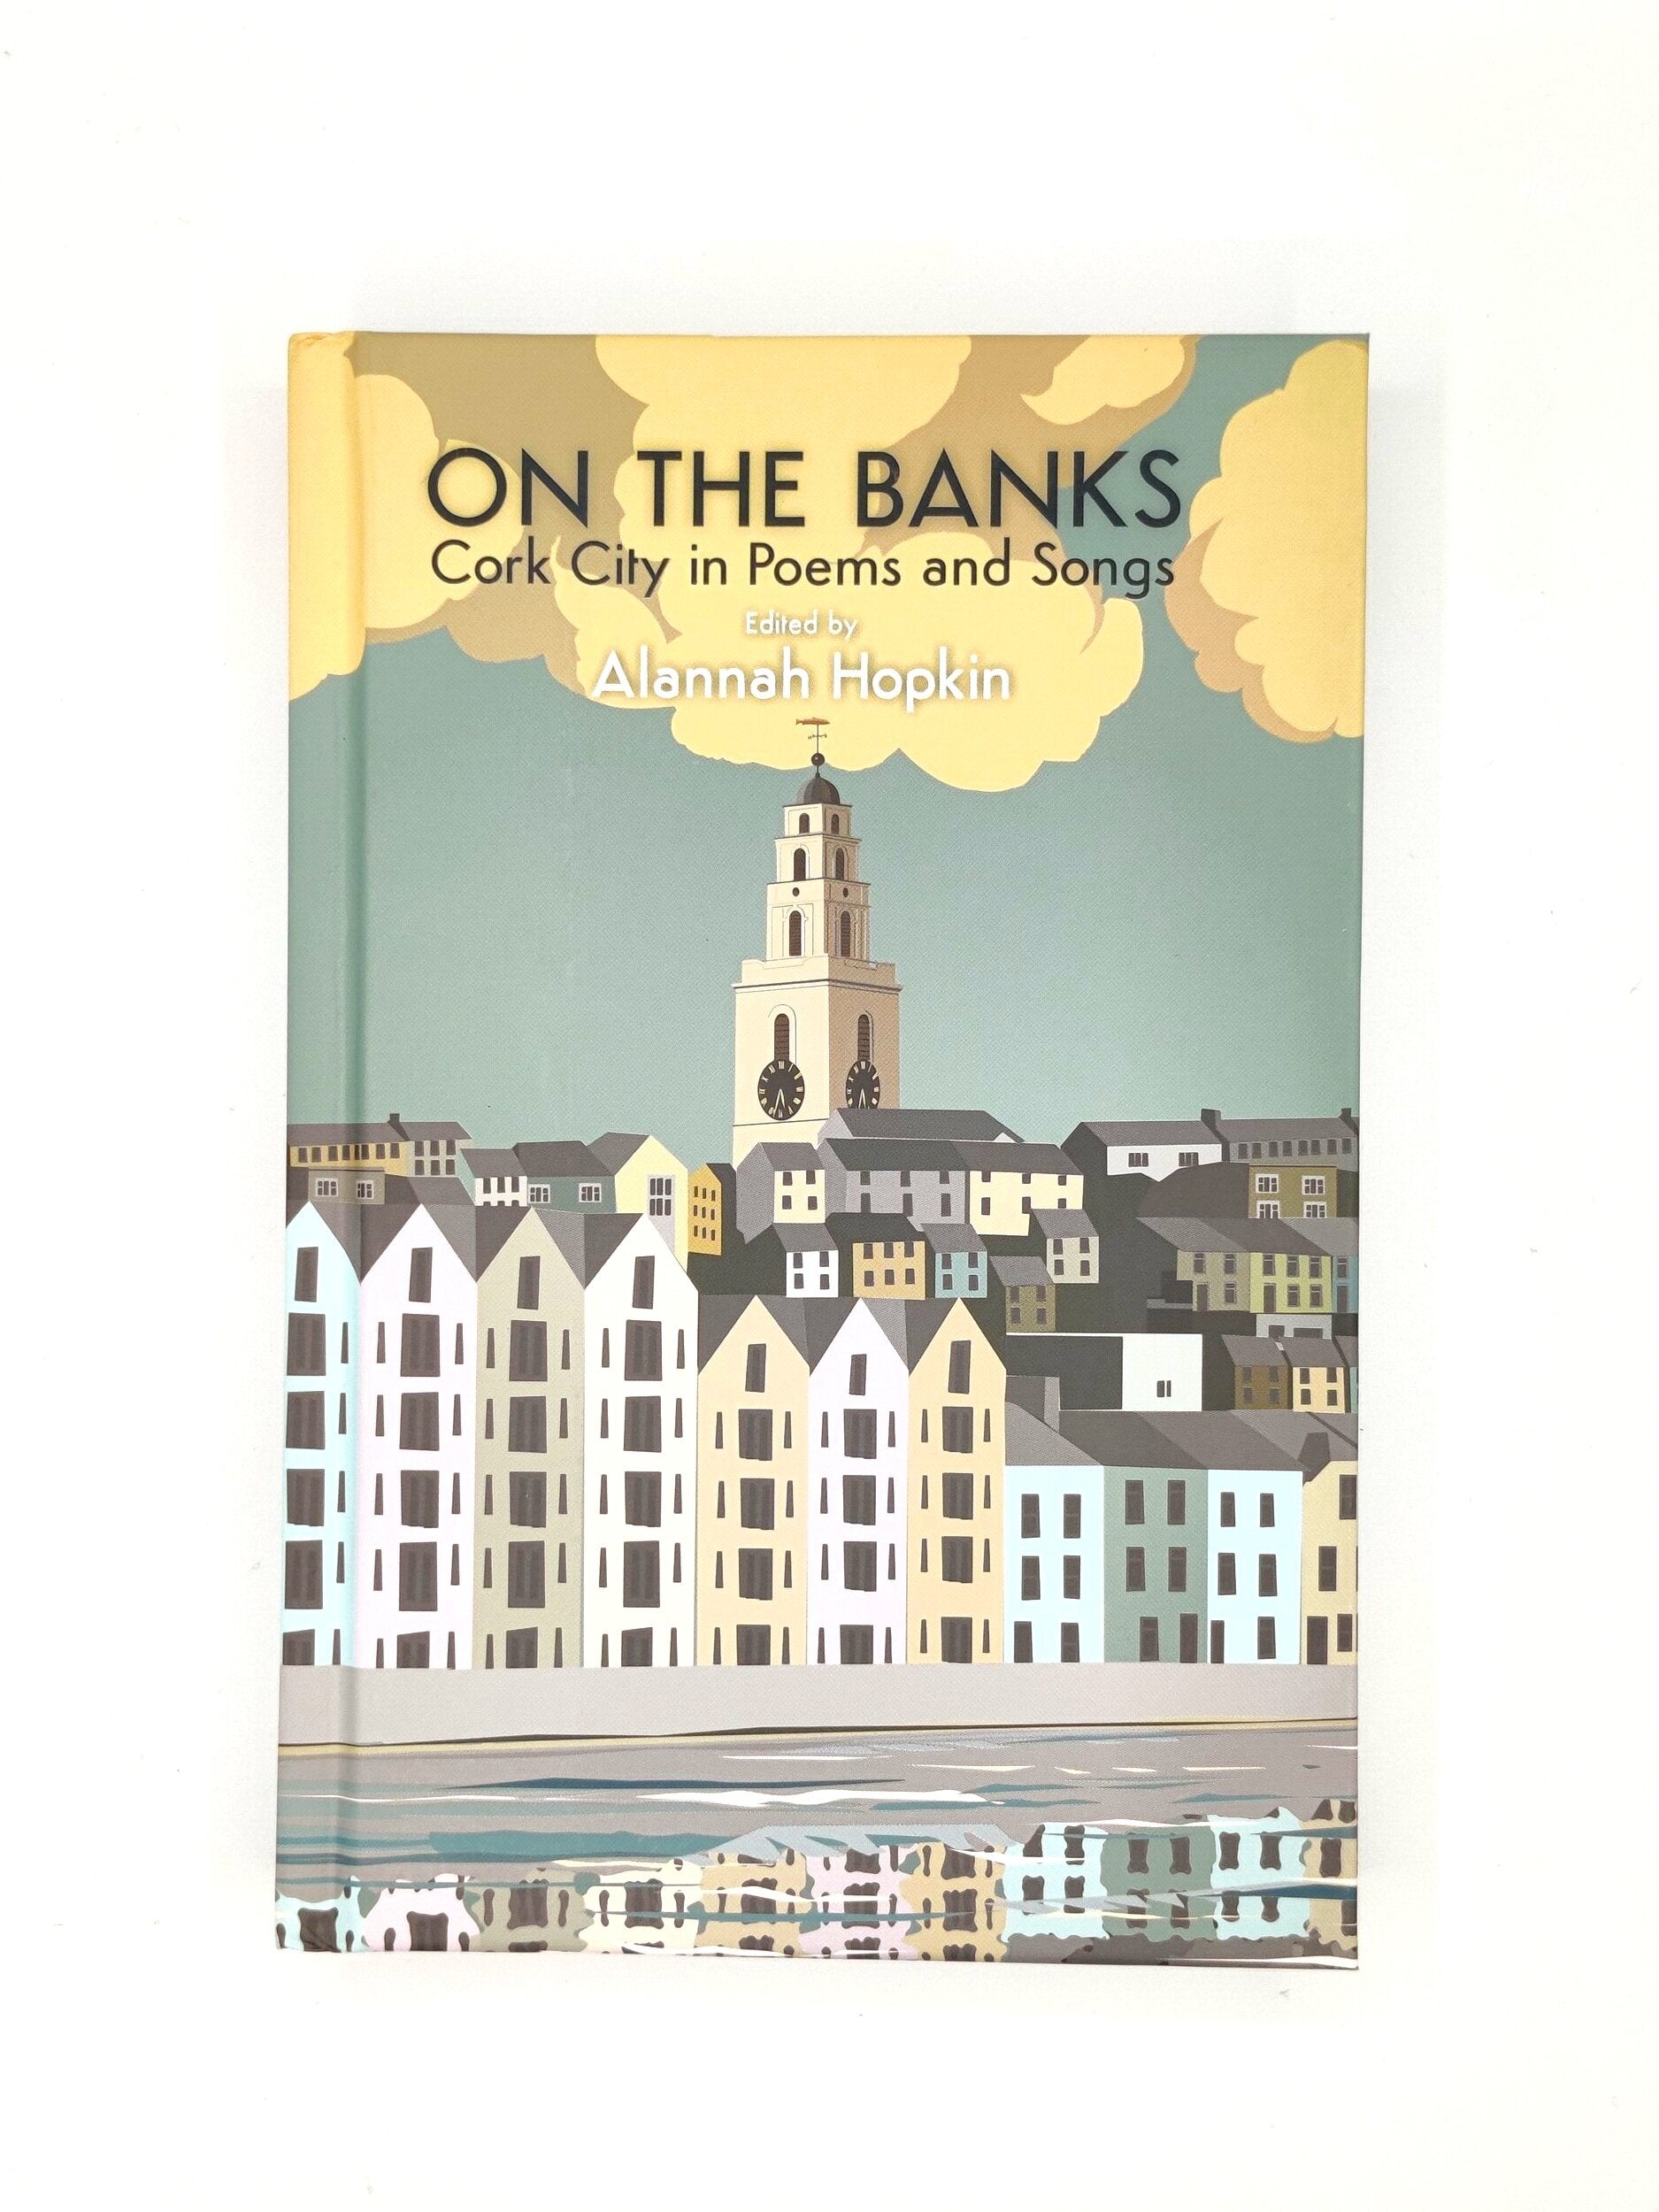 On the Banks: Cork City in Poems and Songs hardback book